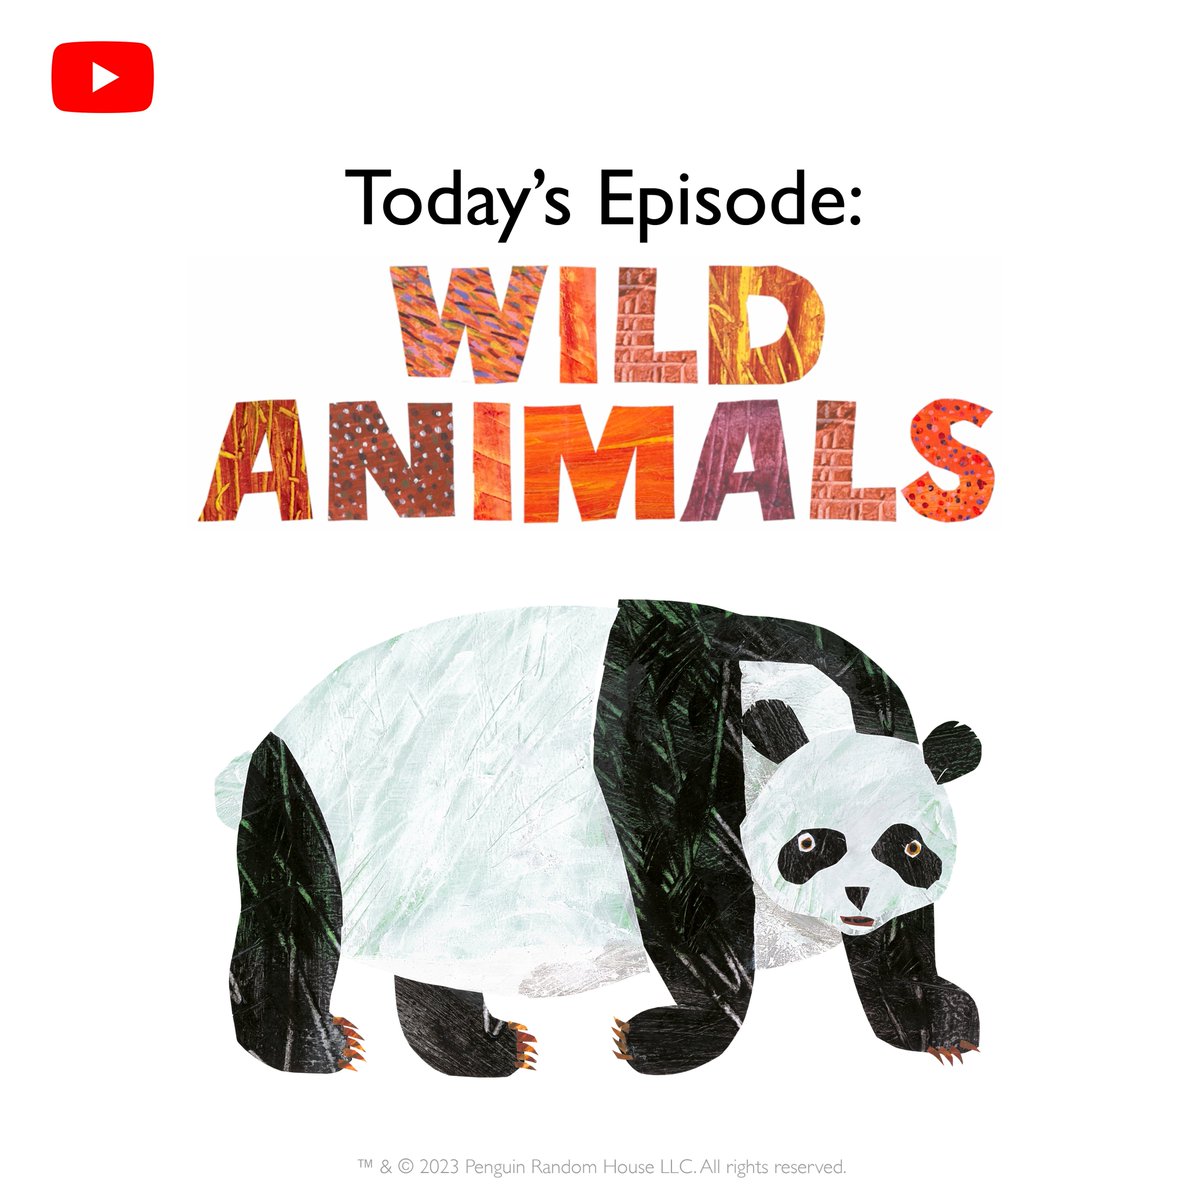 Today’s World of Eric Carle YouTube episode is about WILD ANIMALS. This episode includes a full storytime read-aloud of Panda Bear, Panda Bear, What Do You See? and you can take part in a delicious craft activity inspired by bears! youtu.be/WGh044_wGqY